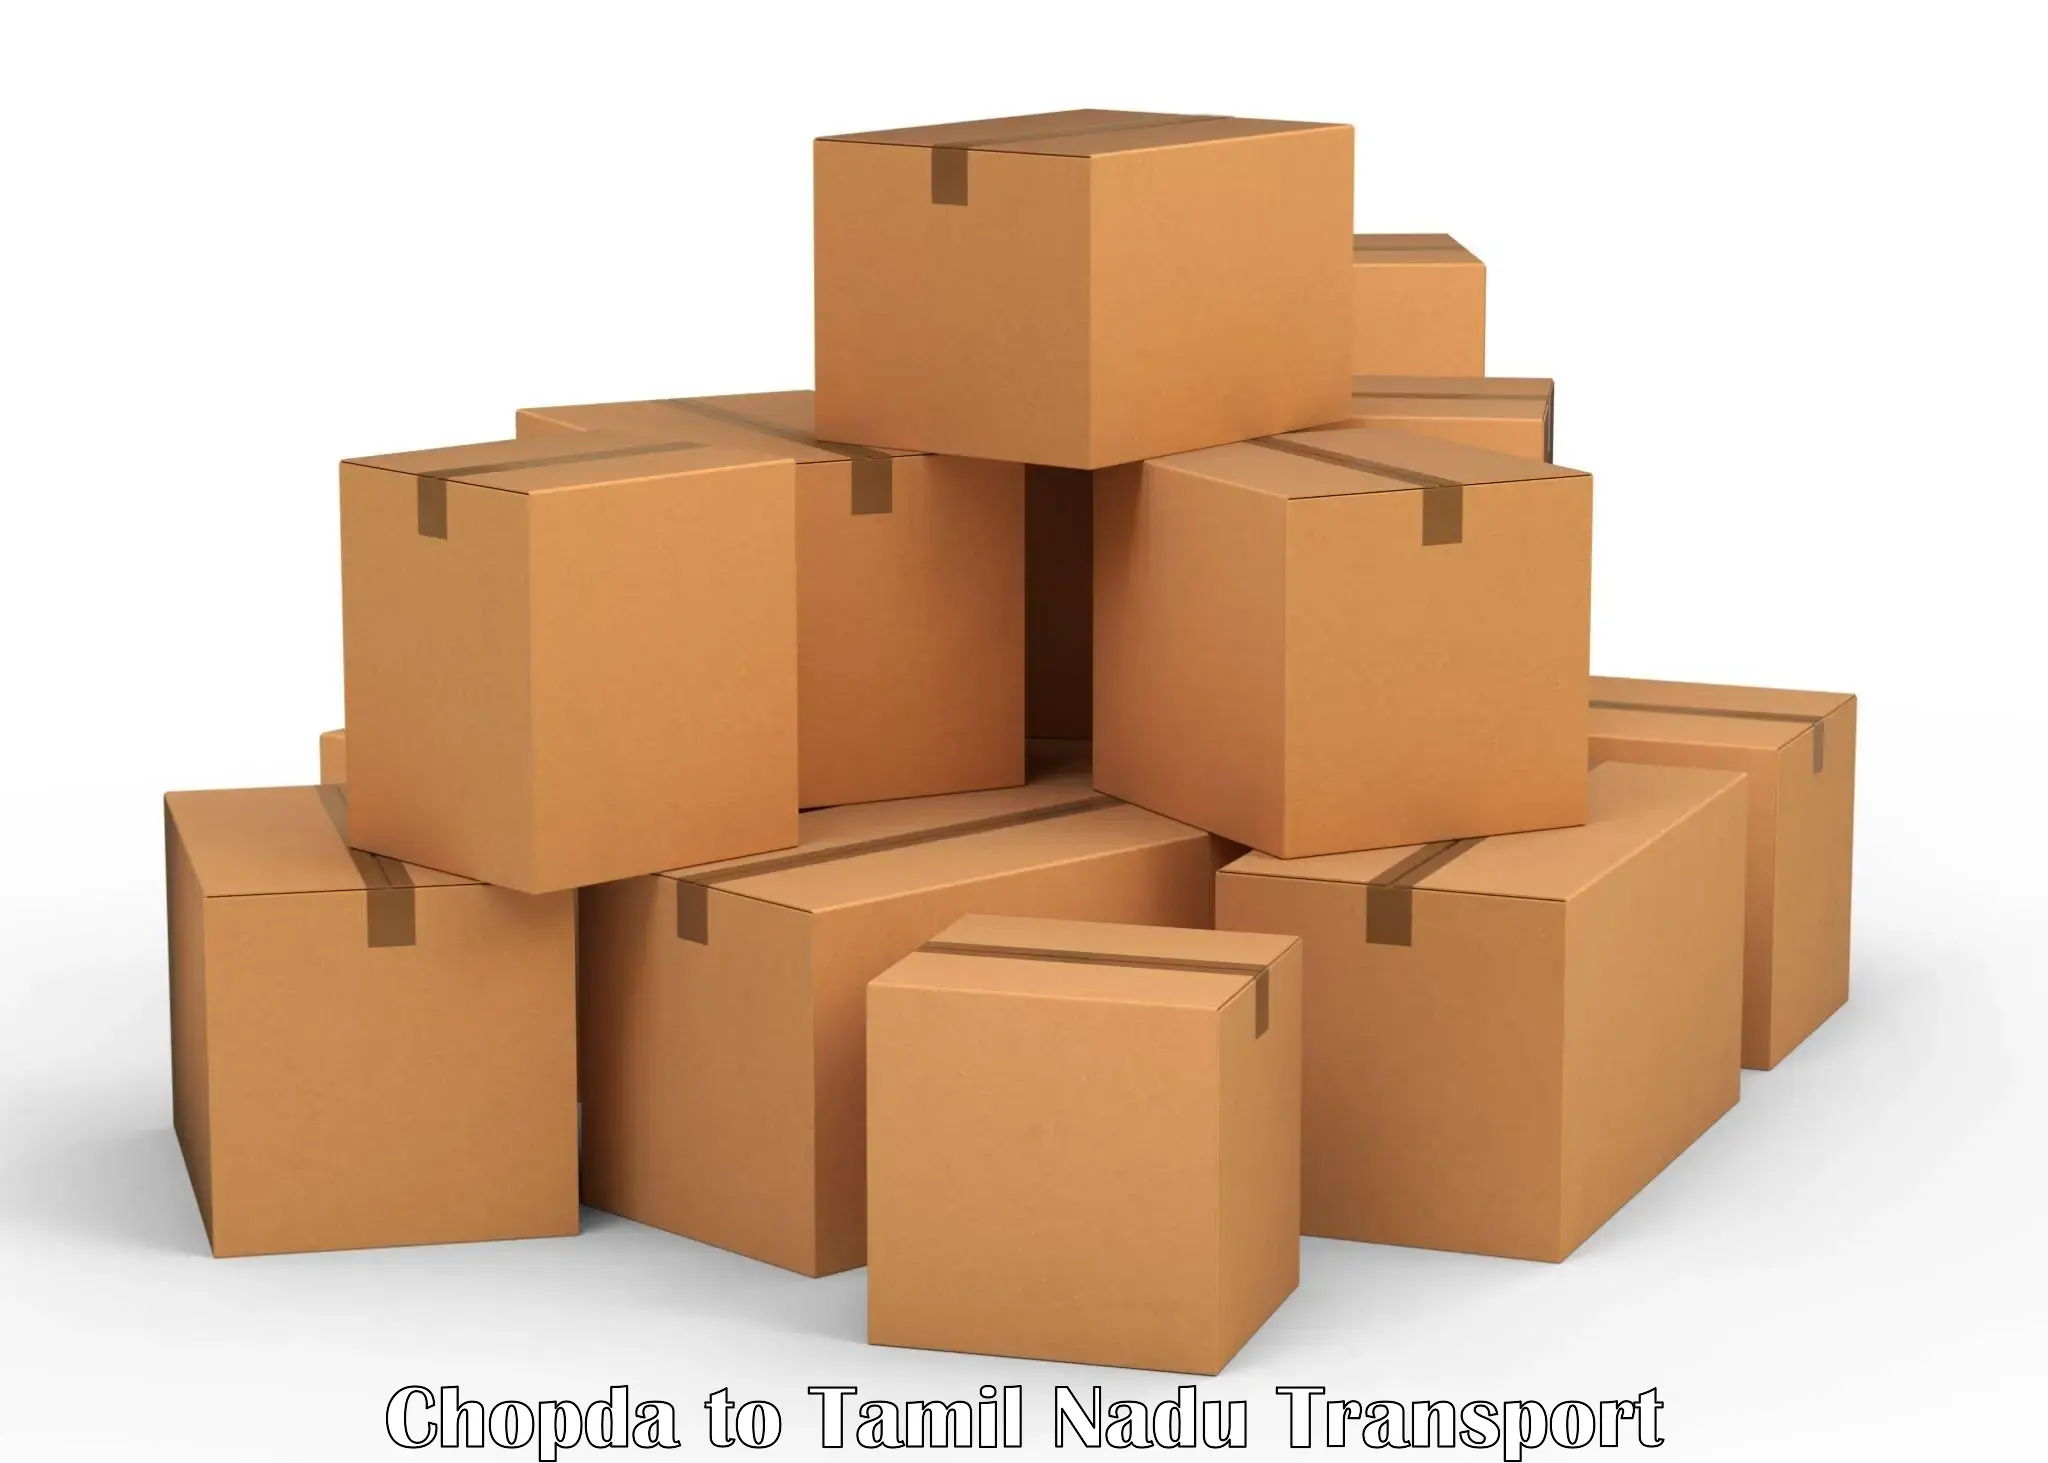 Truck transport companies in India in Chopda to Chennai Port